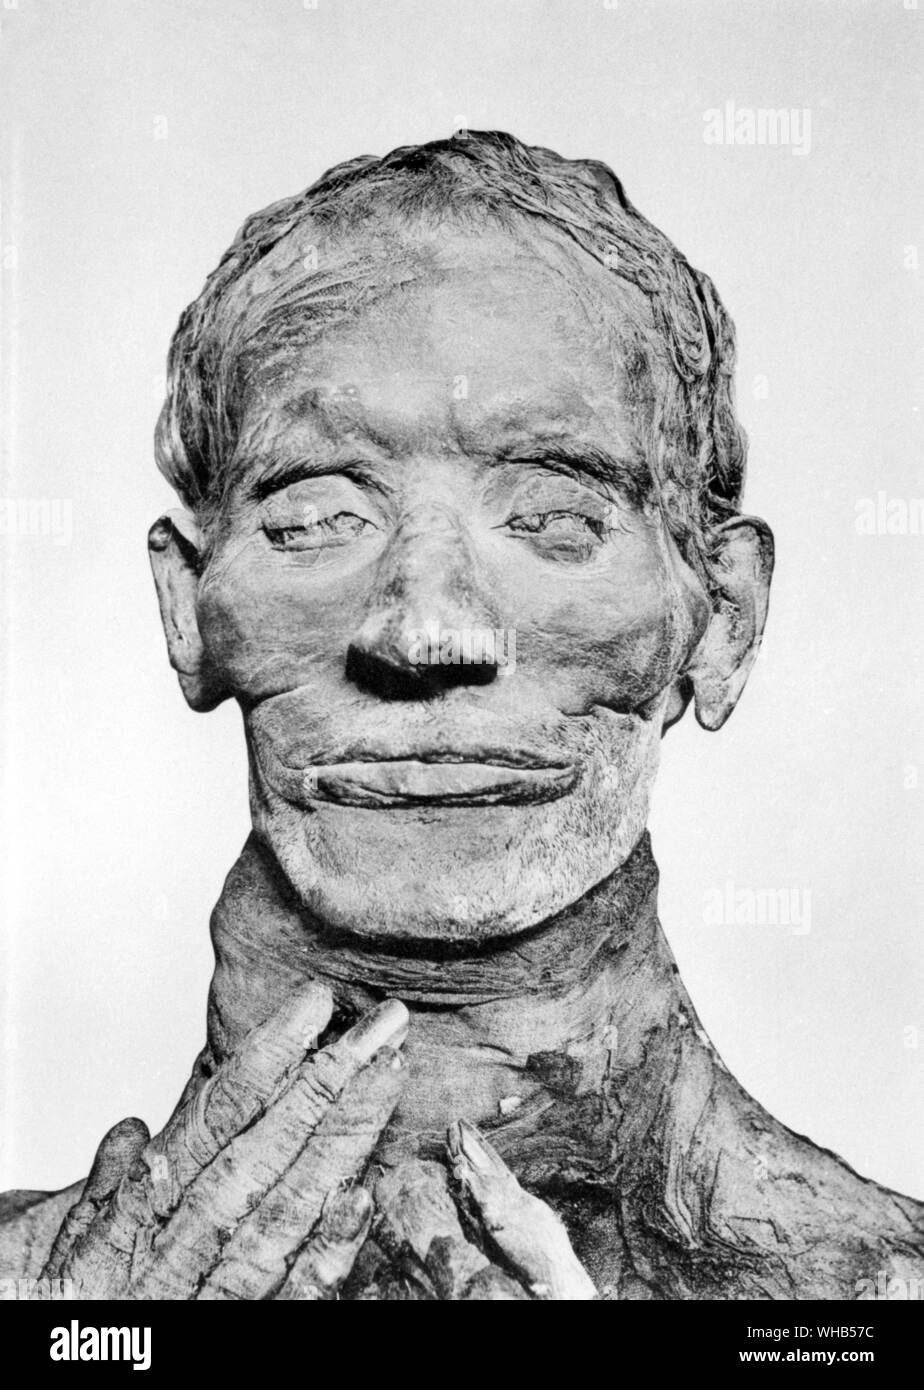 Mummy of yuya juja father-in-law of Amenophius or Amenhotep III. He was a powerful Egyptian courtier of the Eighteenth dynasty of Egypt - ( 1417 - 1379 BC ). . Stock Photo